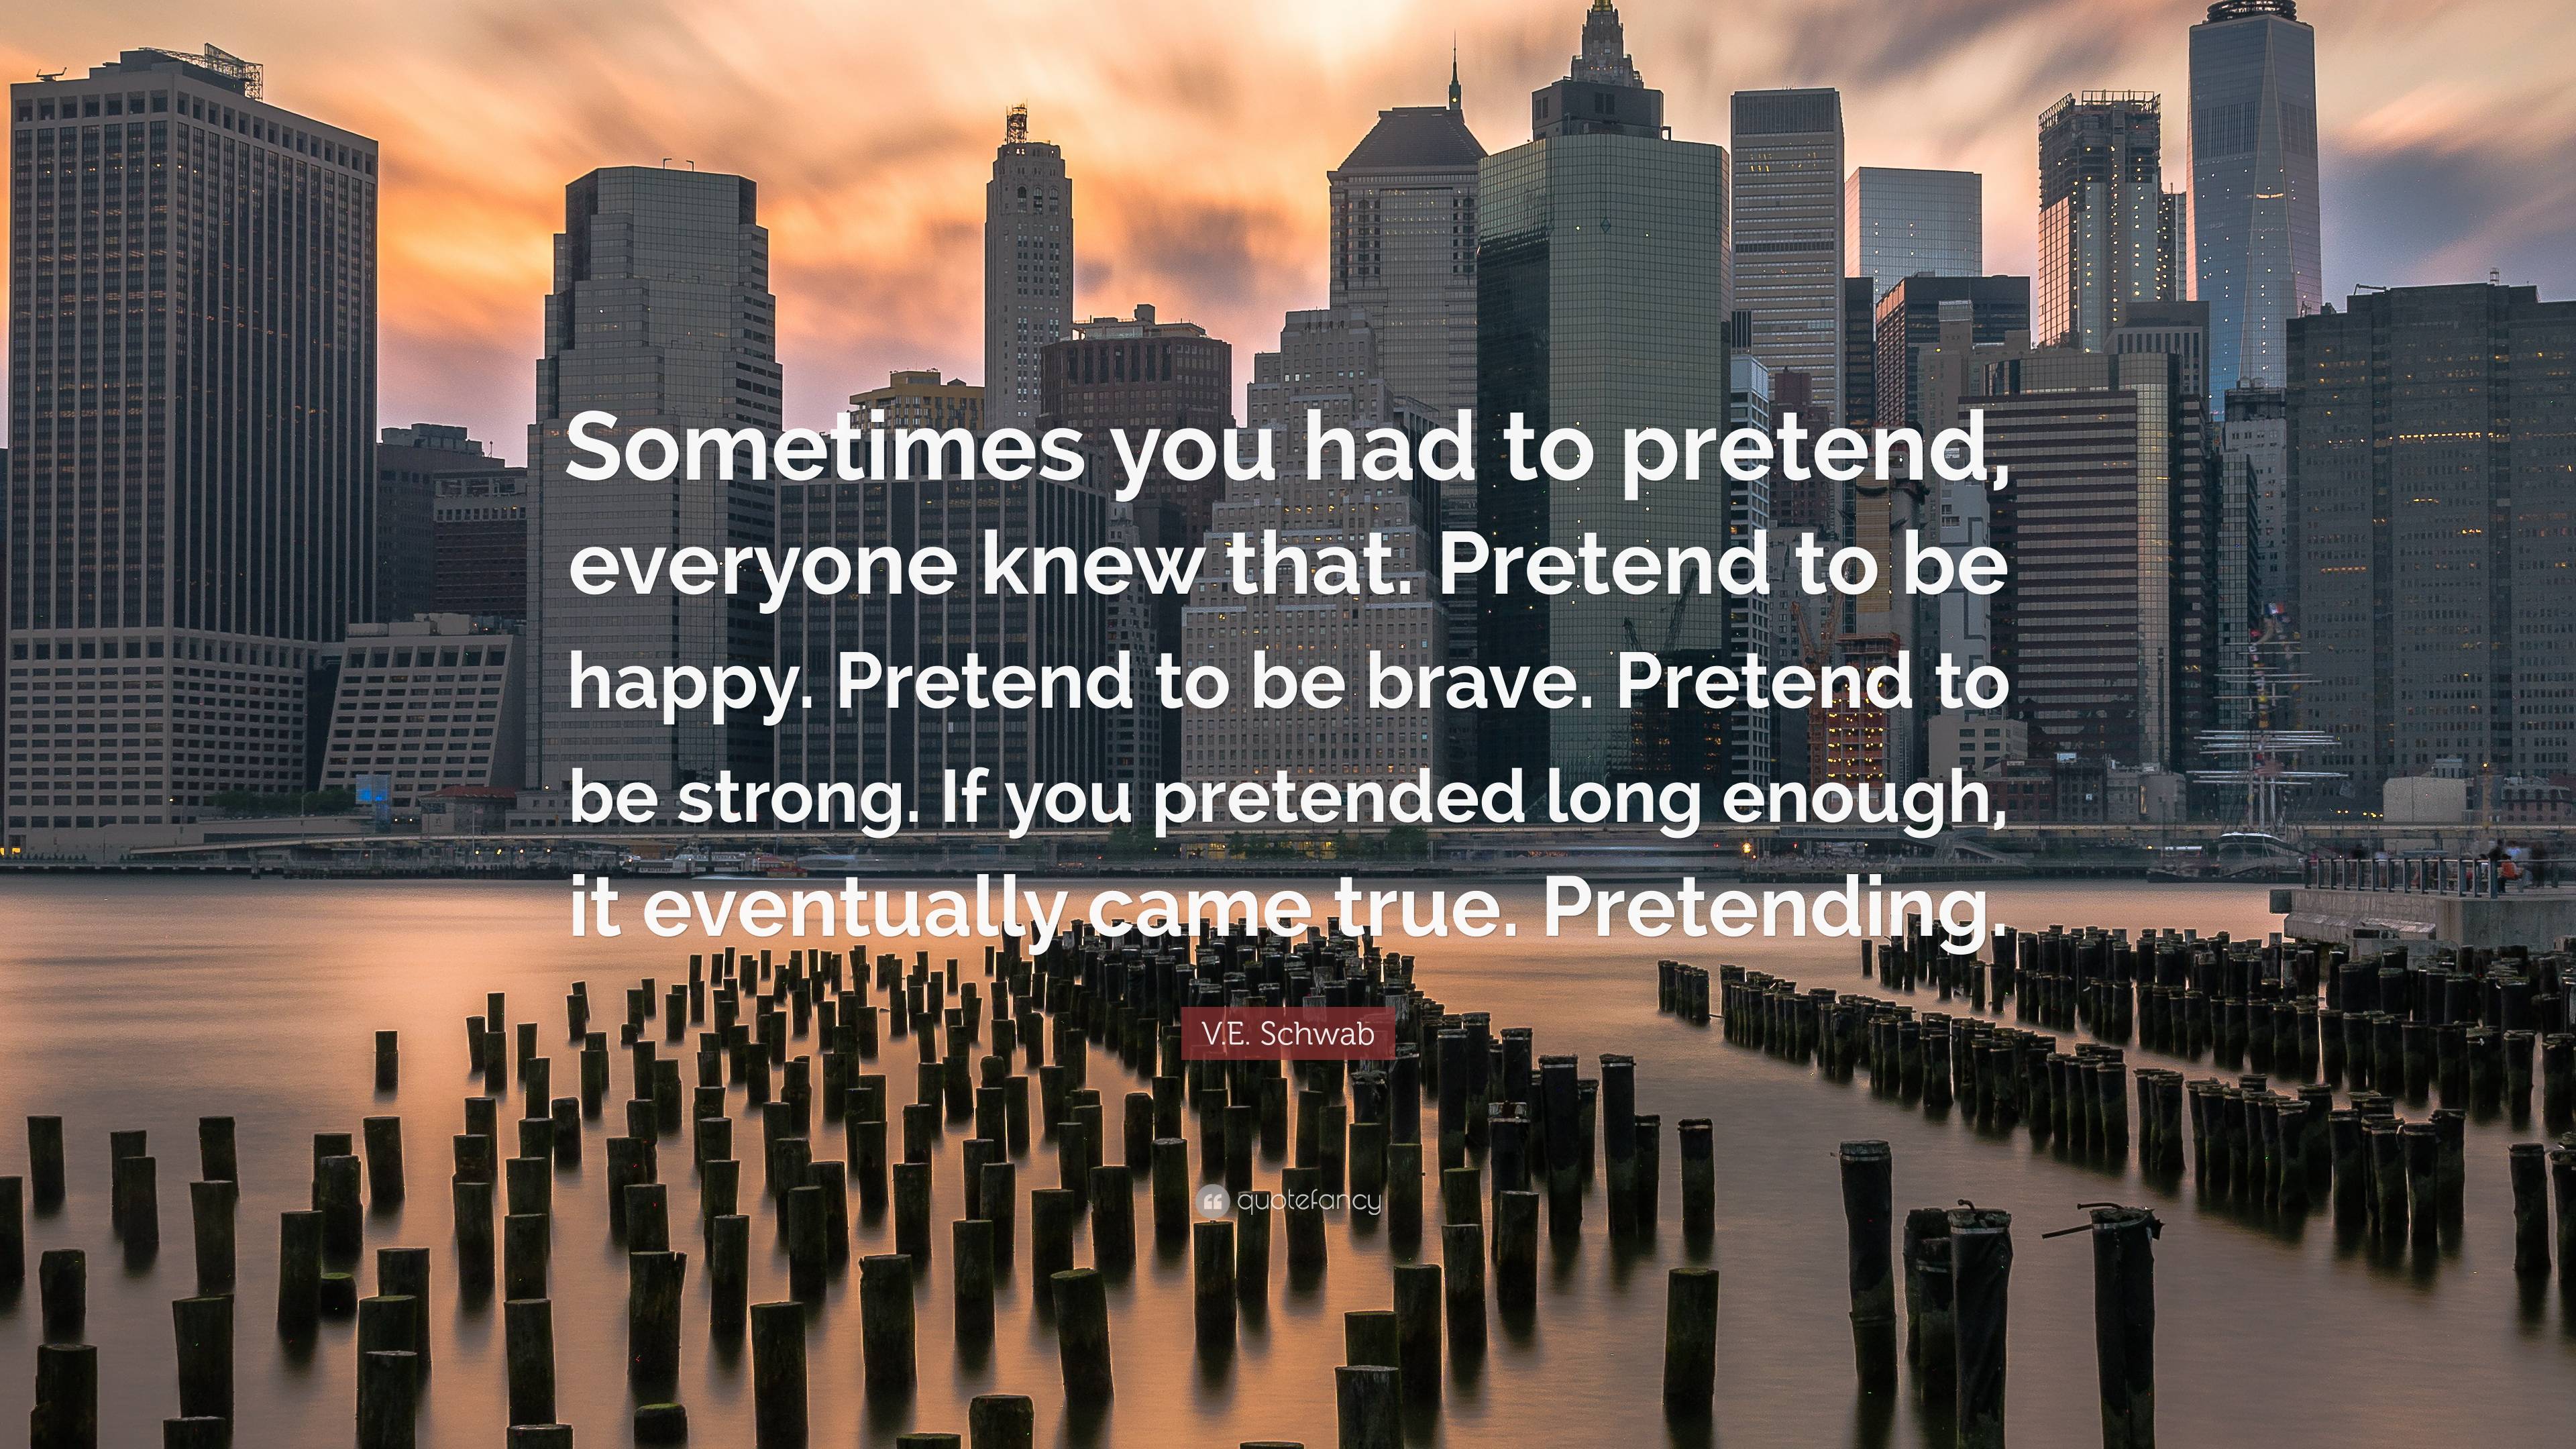 V.E. Schwab Quote: “Sometimes you had to pretend, everyone knew that ...